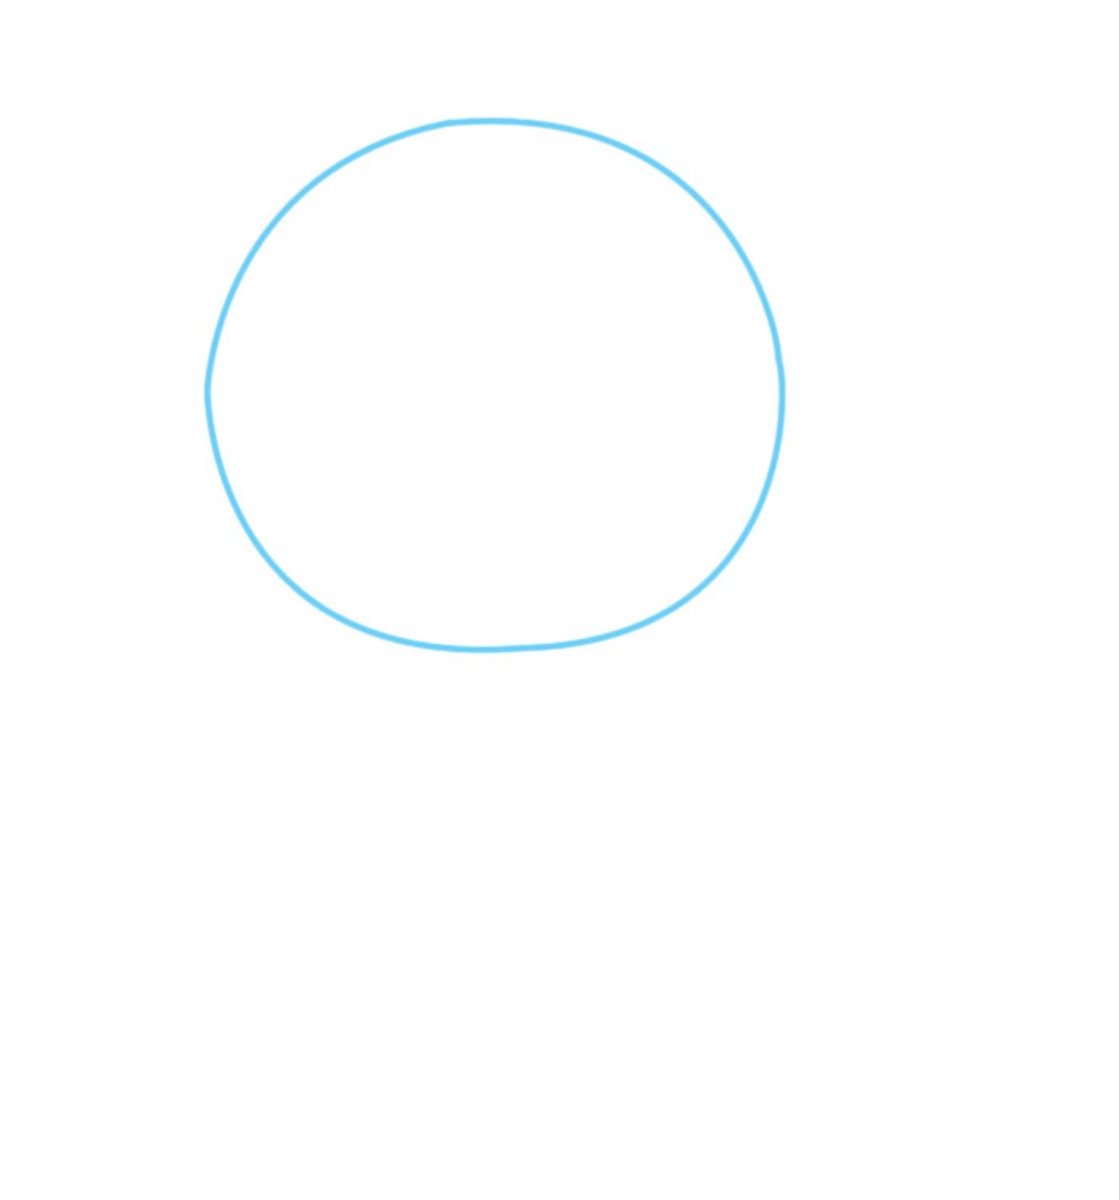 Step 1. Draw a large circle that will become the body.